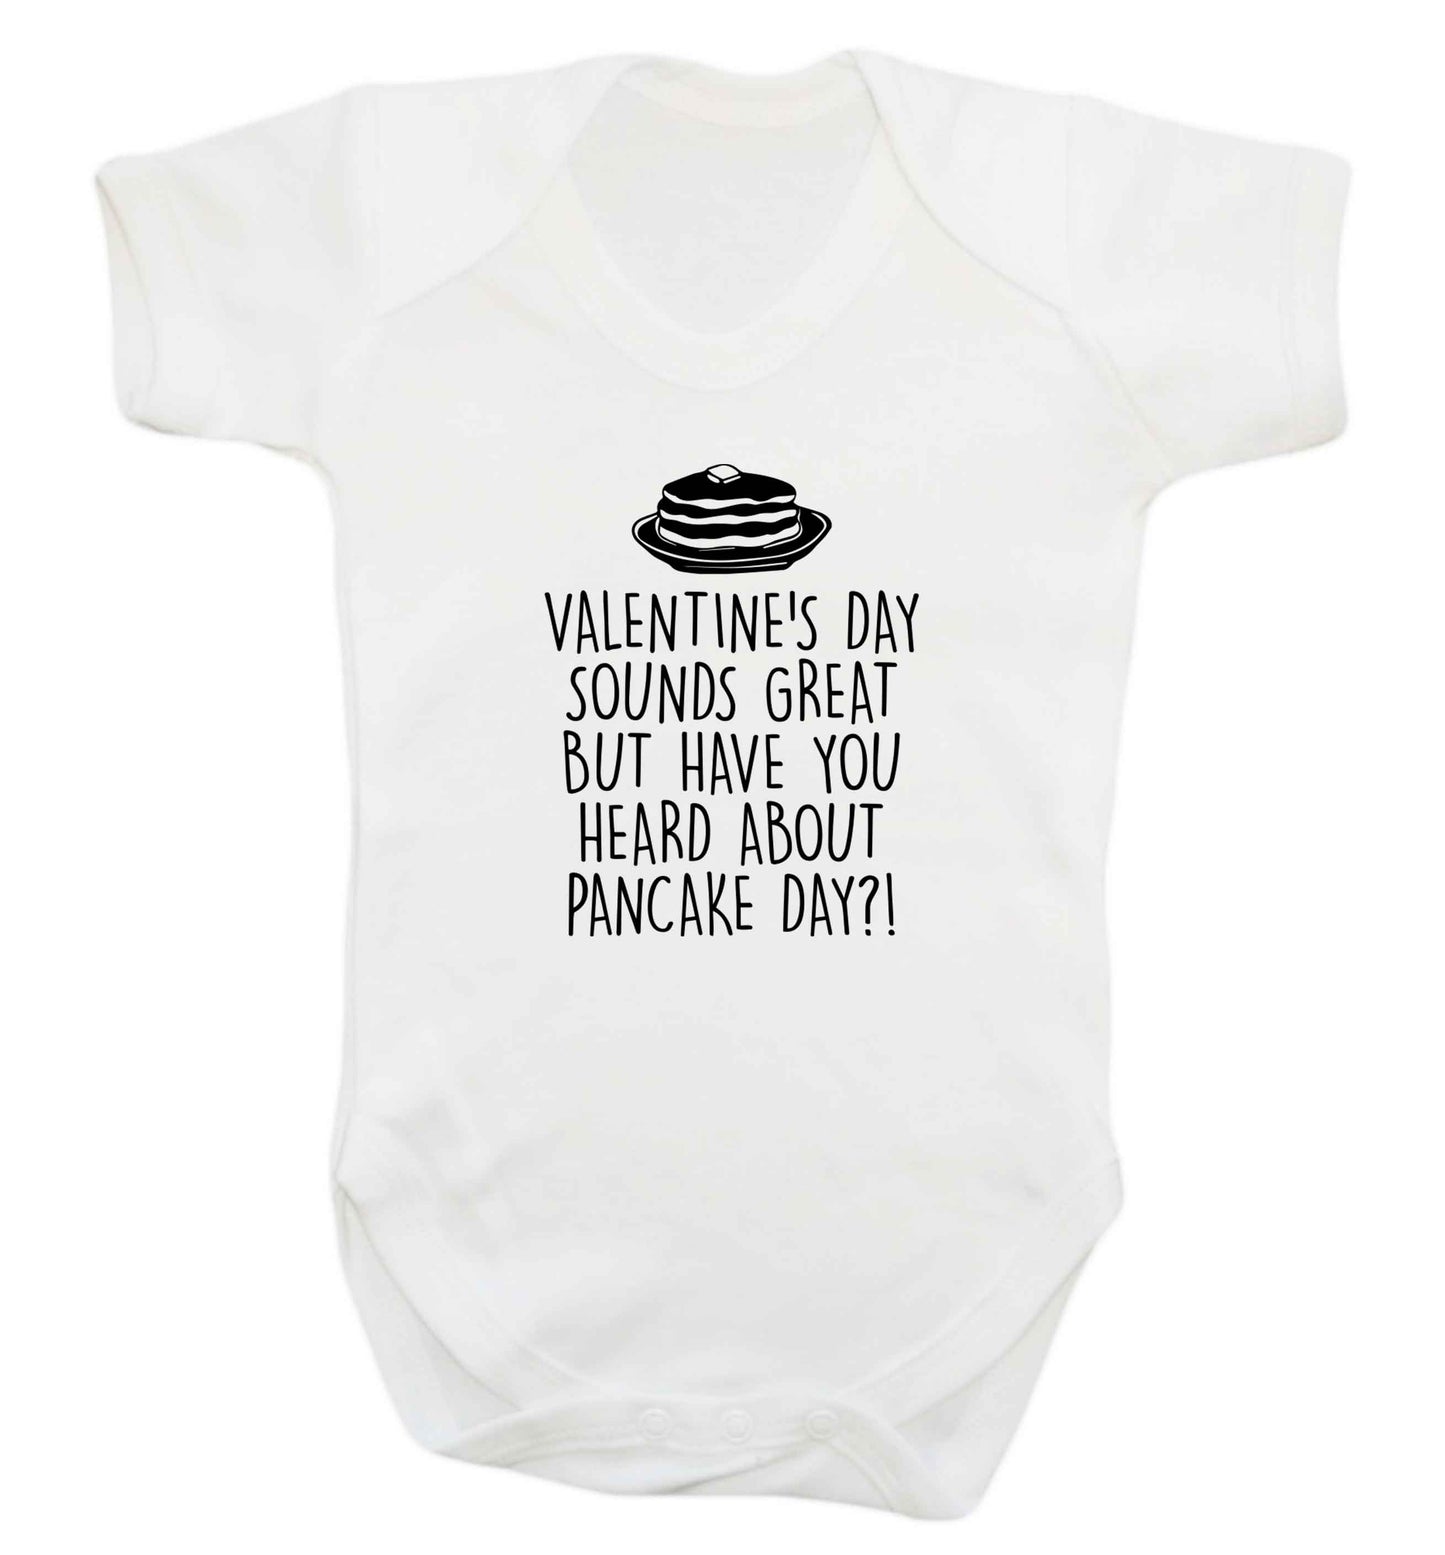 Valentine's day sounds great but have you heard about pancake day?! baby vest white 18-24 months